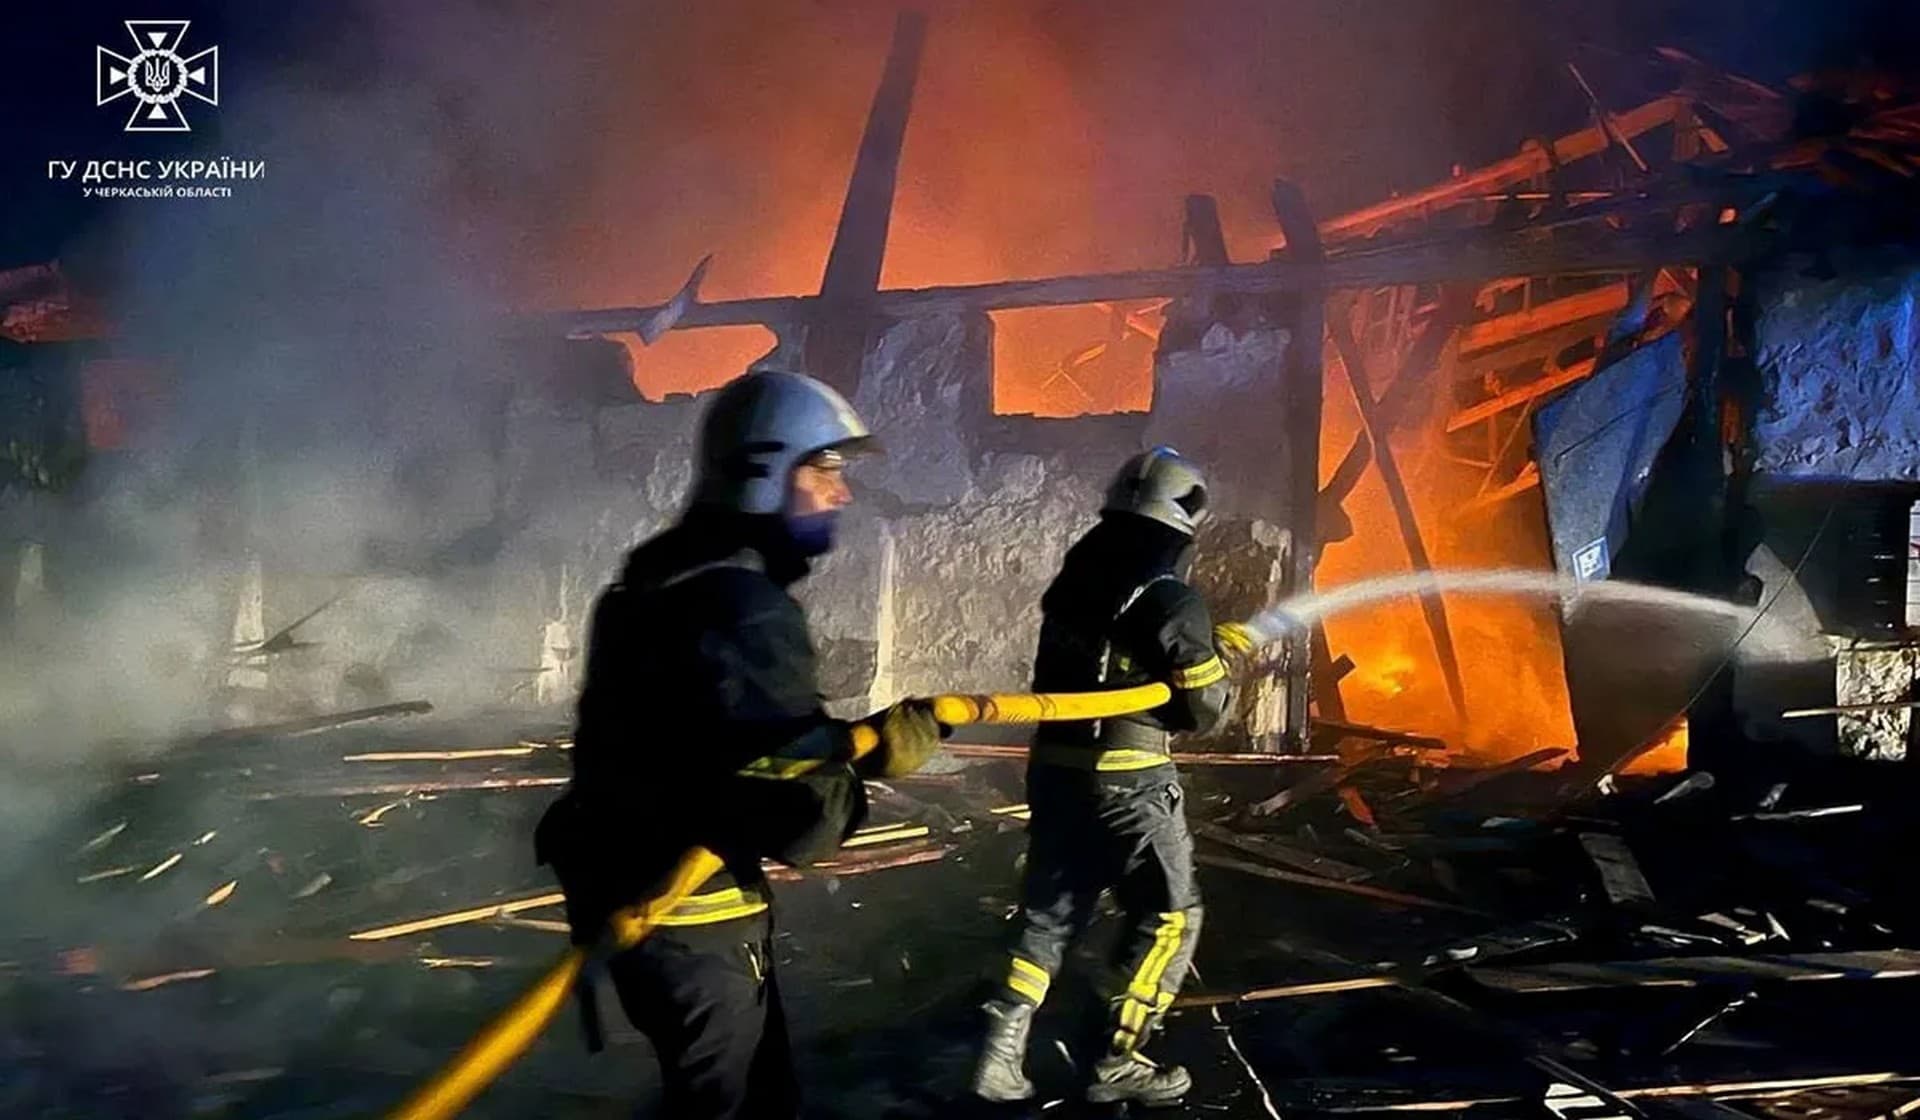 Firefighters work at a site of grain warehouses hit during a Russian drone strike in Uman